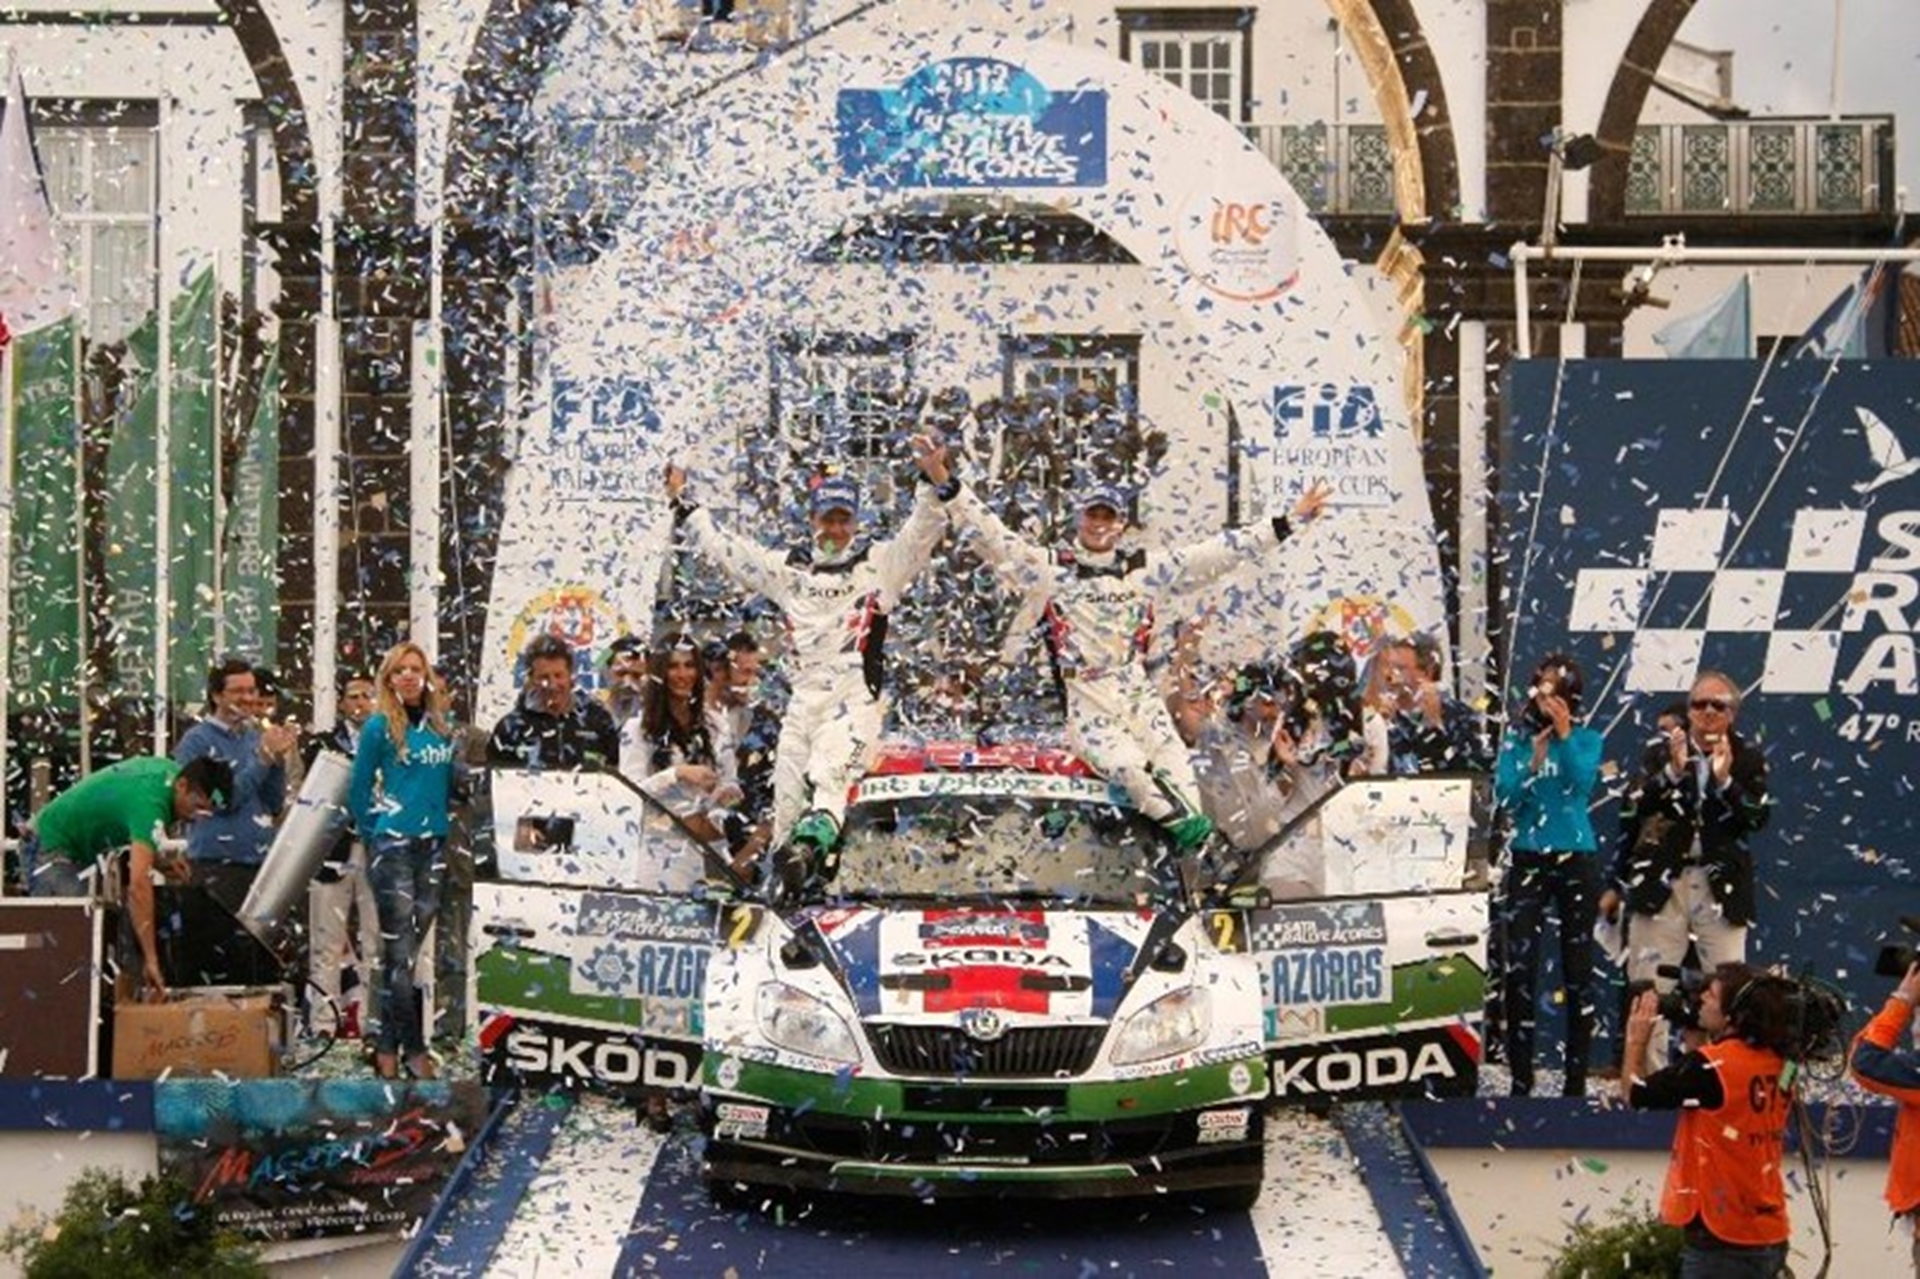 MIKKELSEN MAKES MORE IRC HISTORY IN AZORES